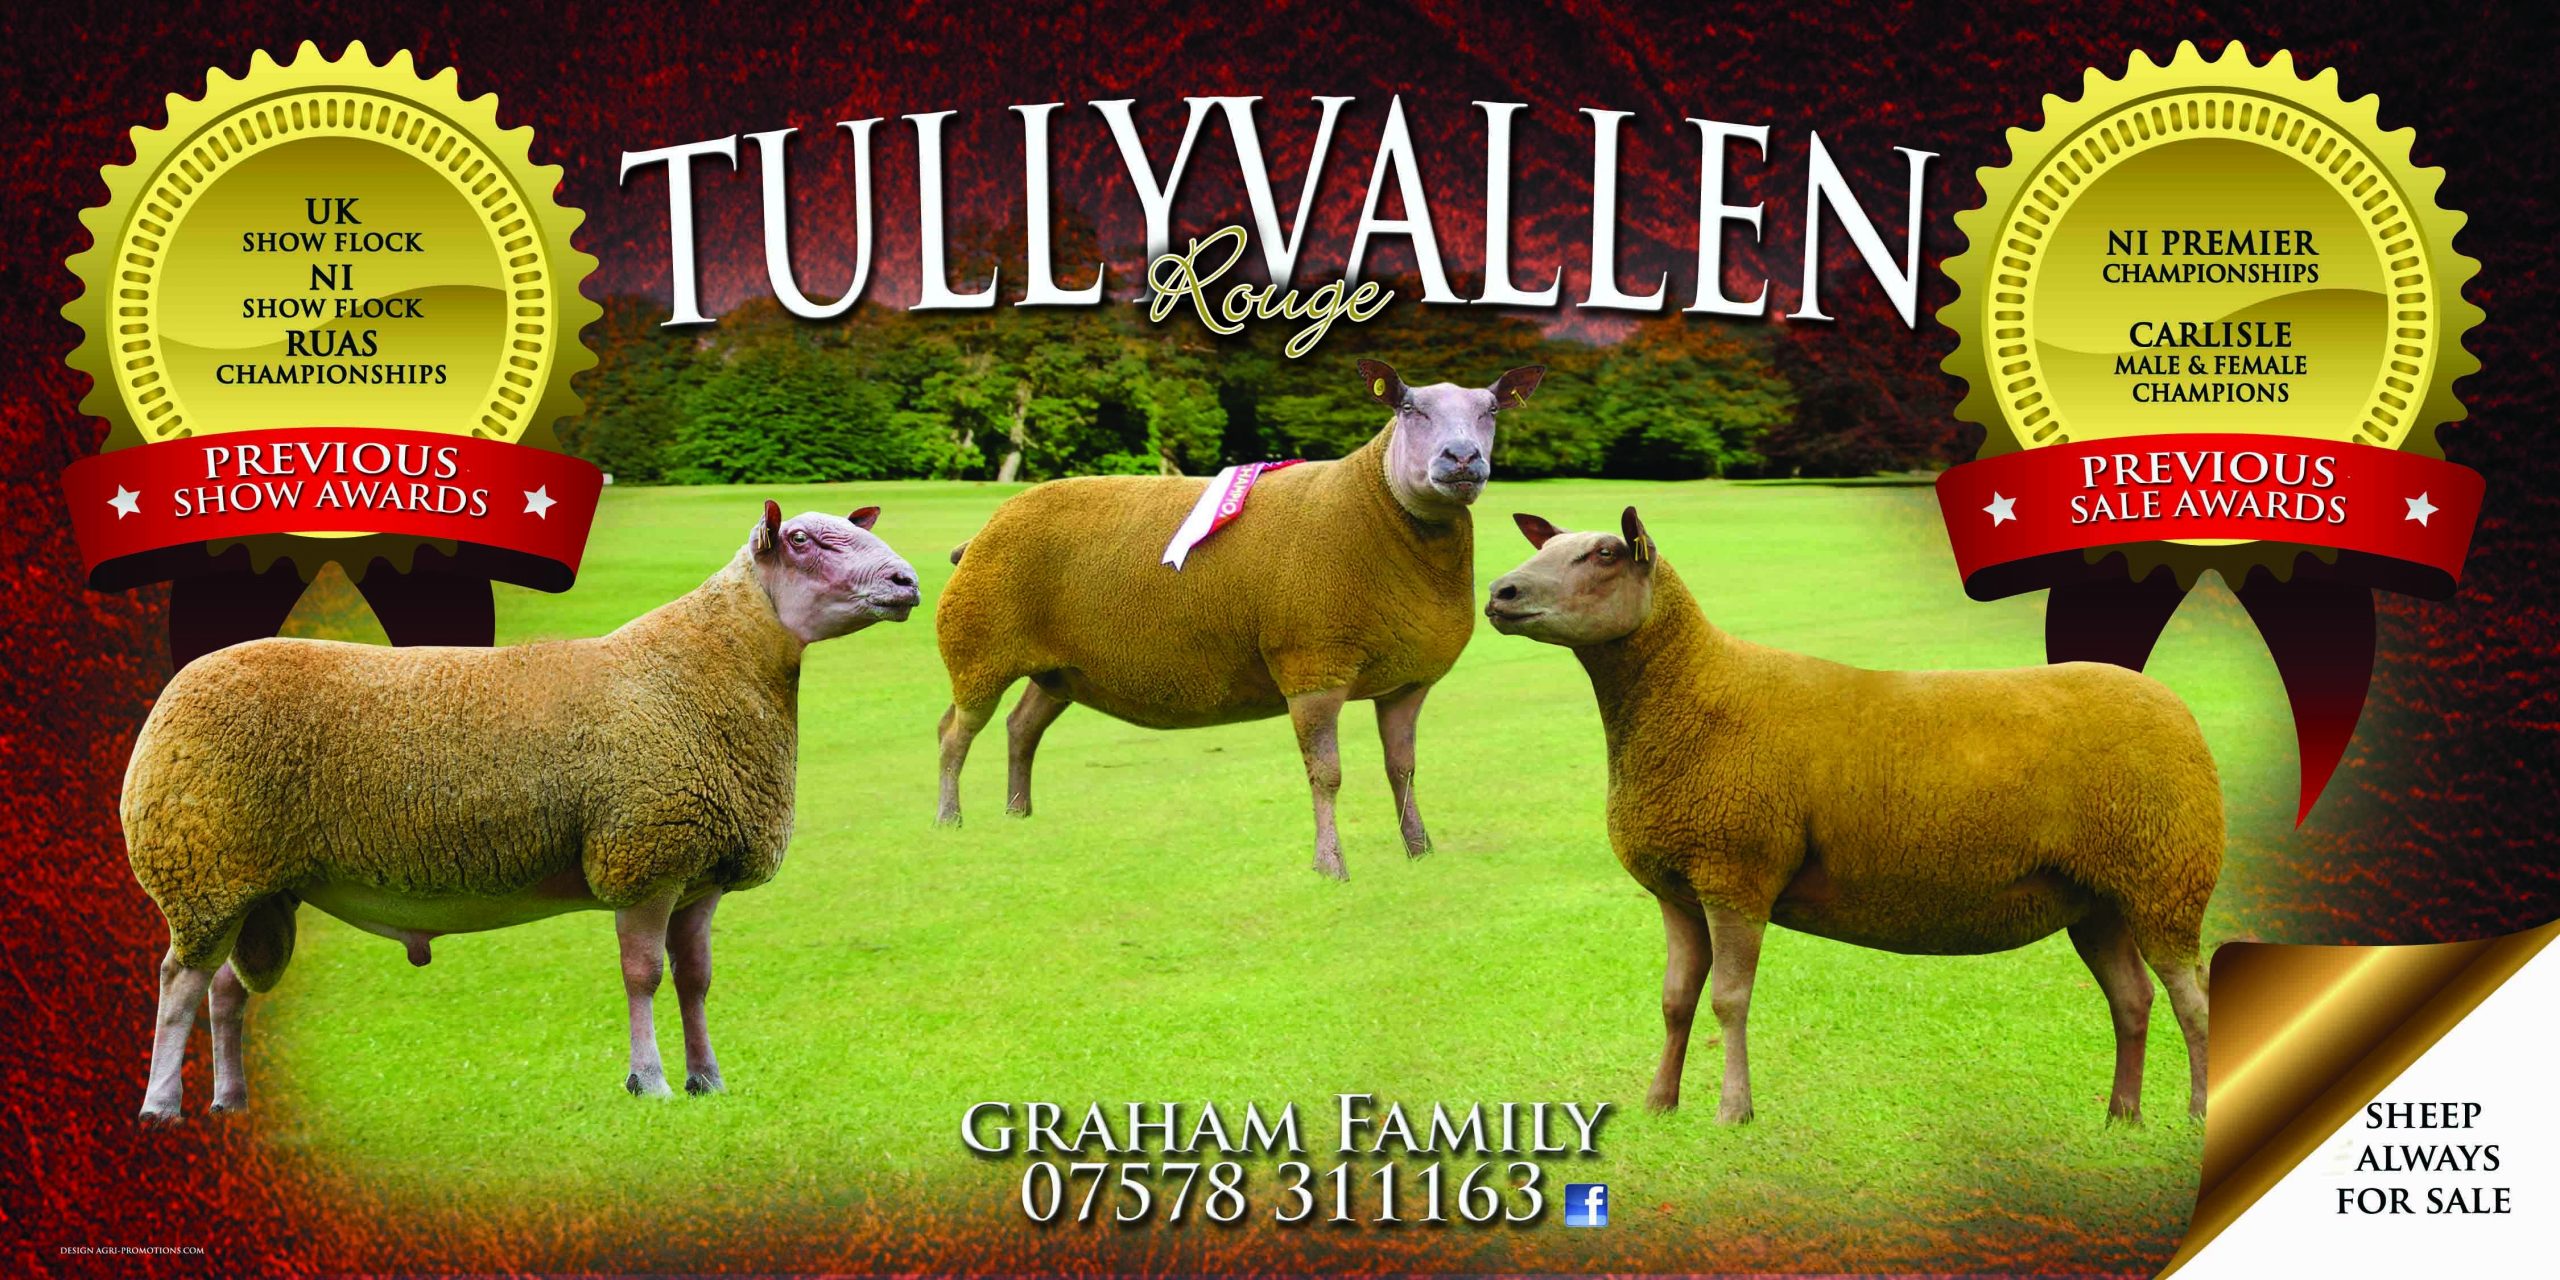 products-tullyvallen_banner_5x2_lr